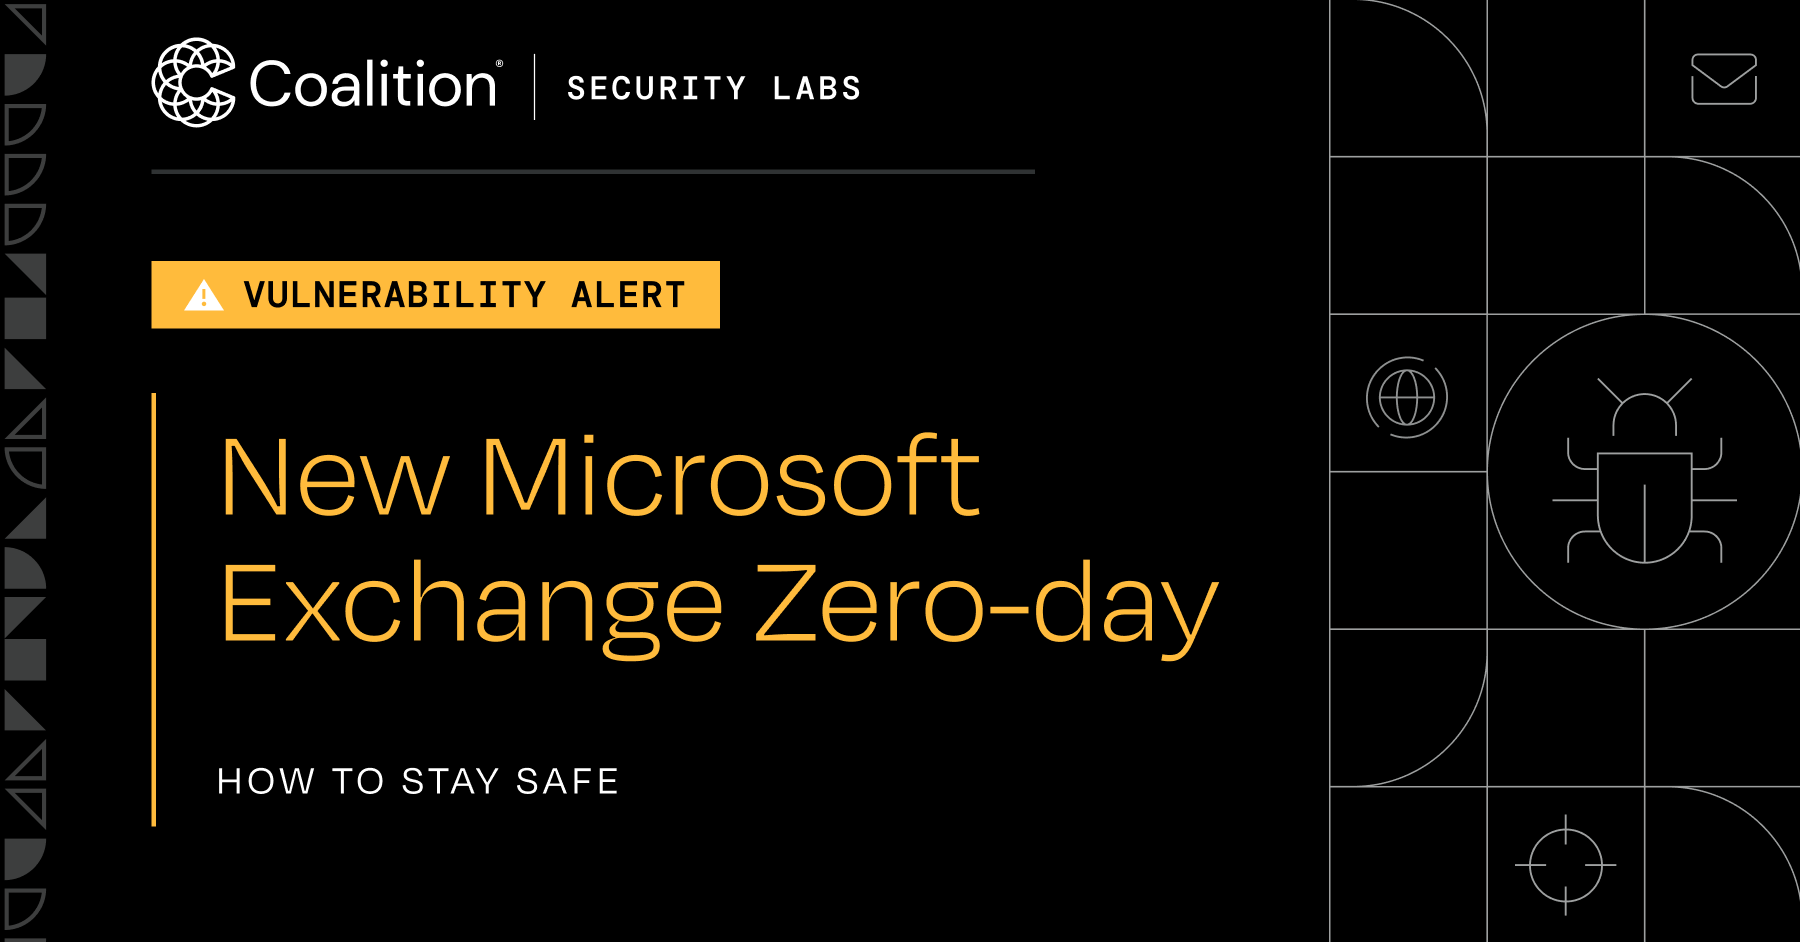 Coalition Blog: New Microsoft Exchange Zero Day: How to stay safe